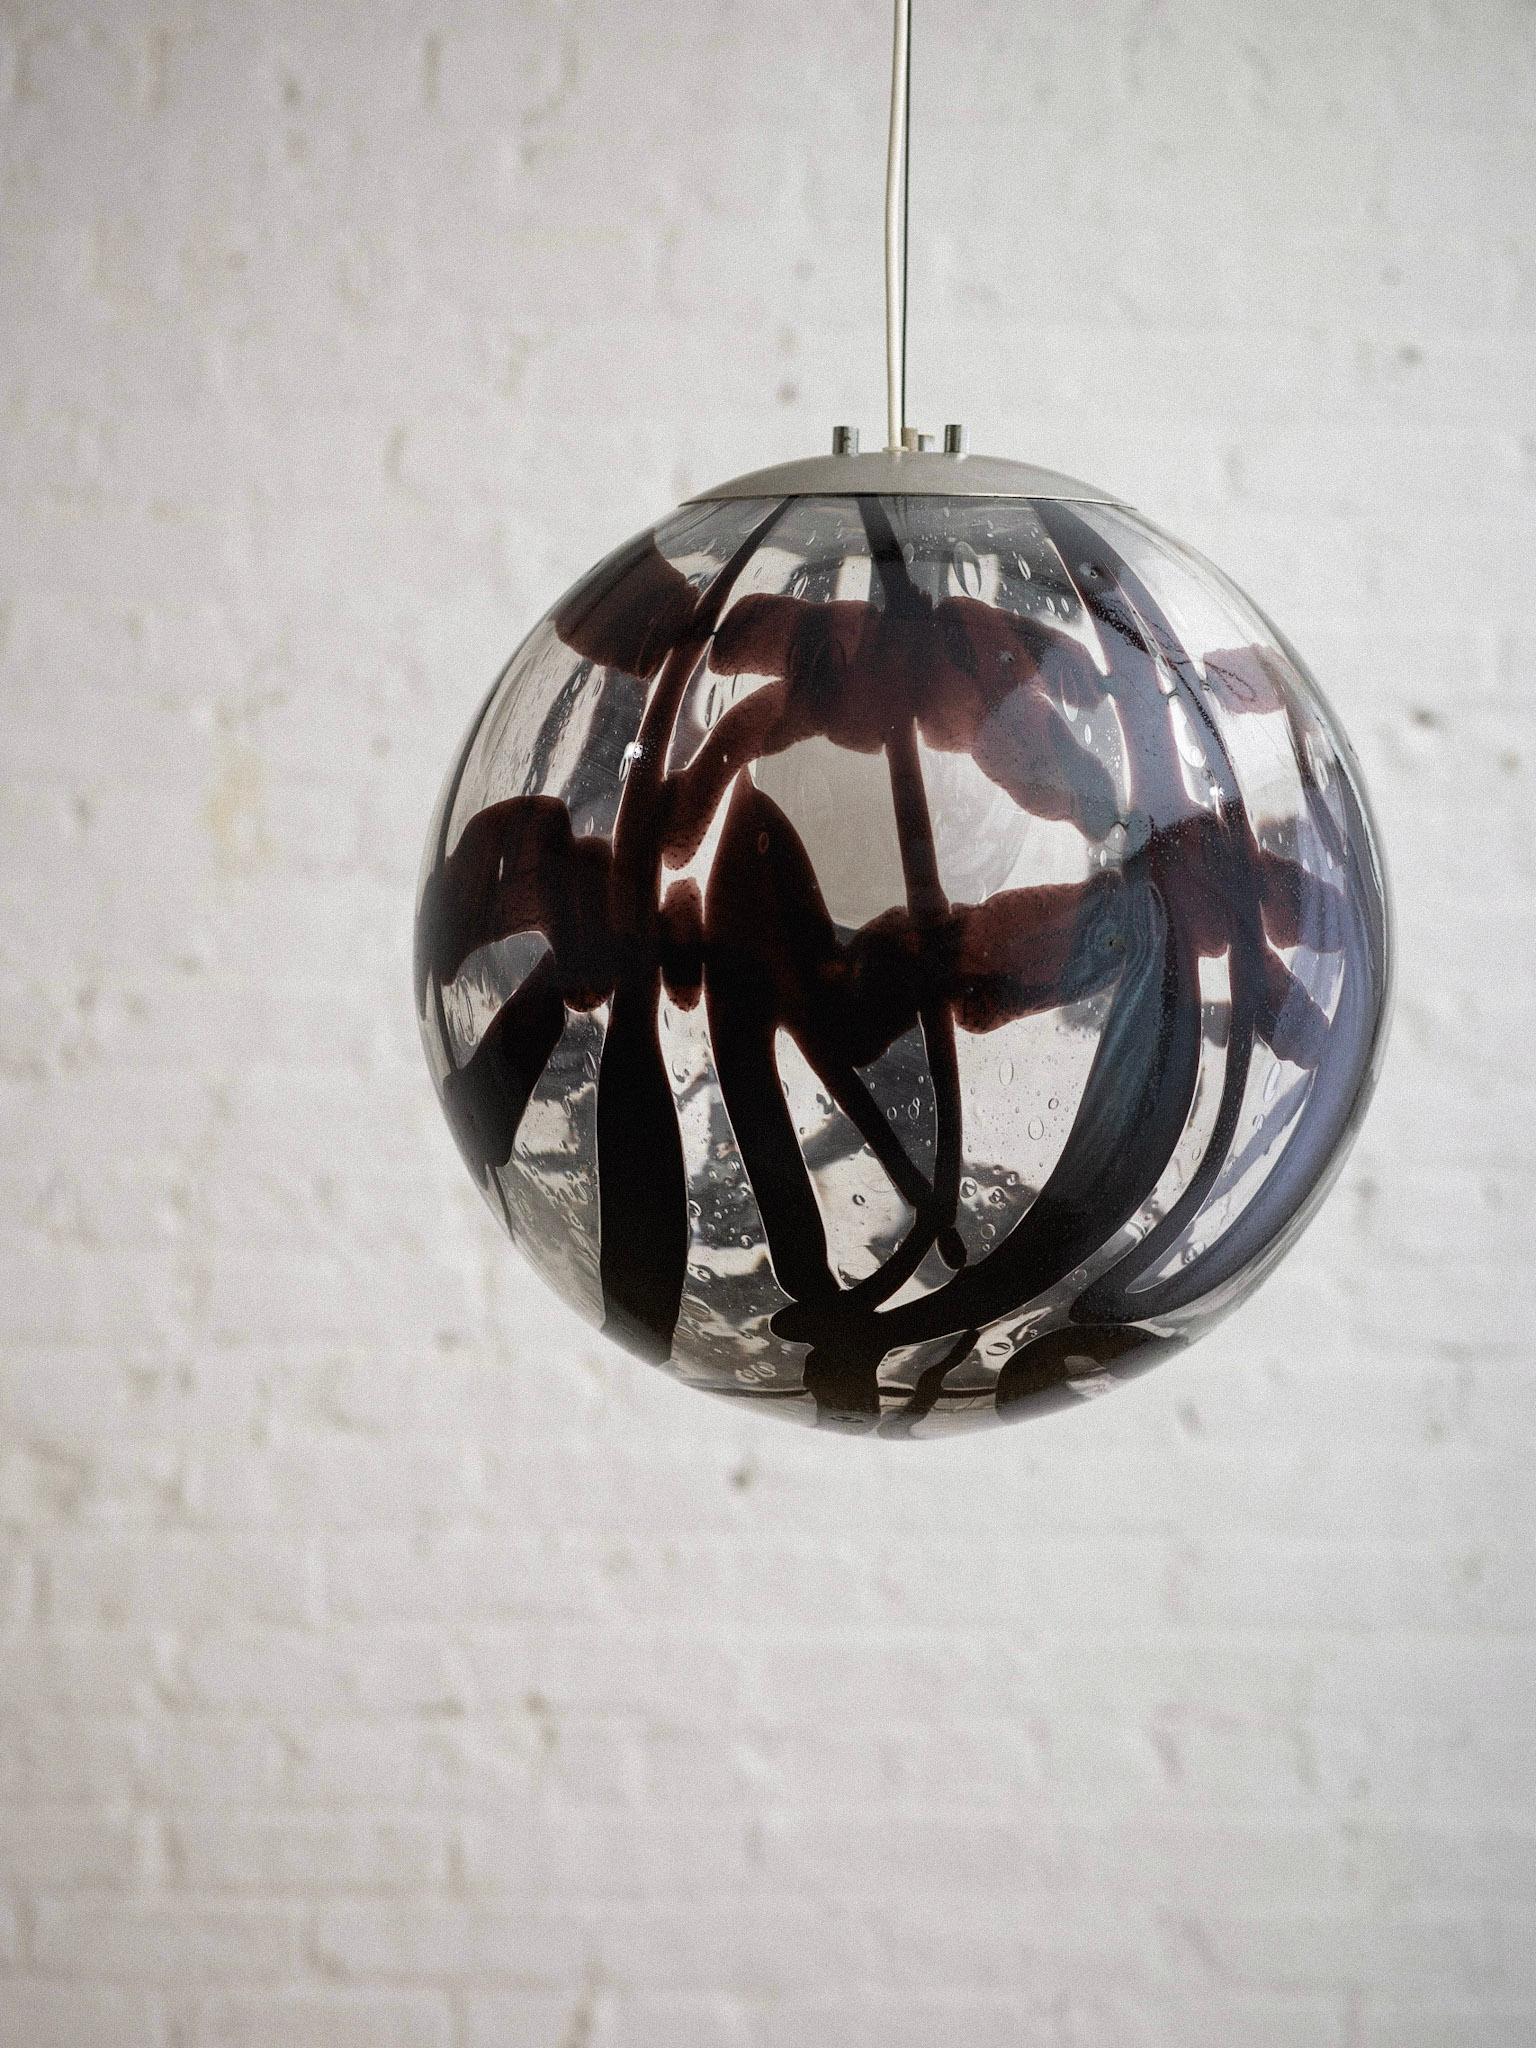 A midcentury Italian Murano glass globe pendant light. Clear glass with a dark abstract graphic pattern. Brushed chrome hardware. Sourced in Northern Italy.